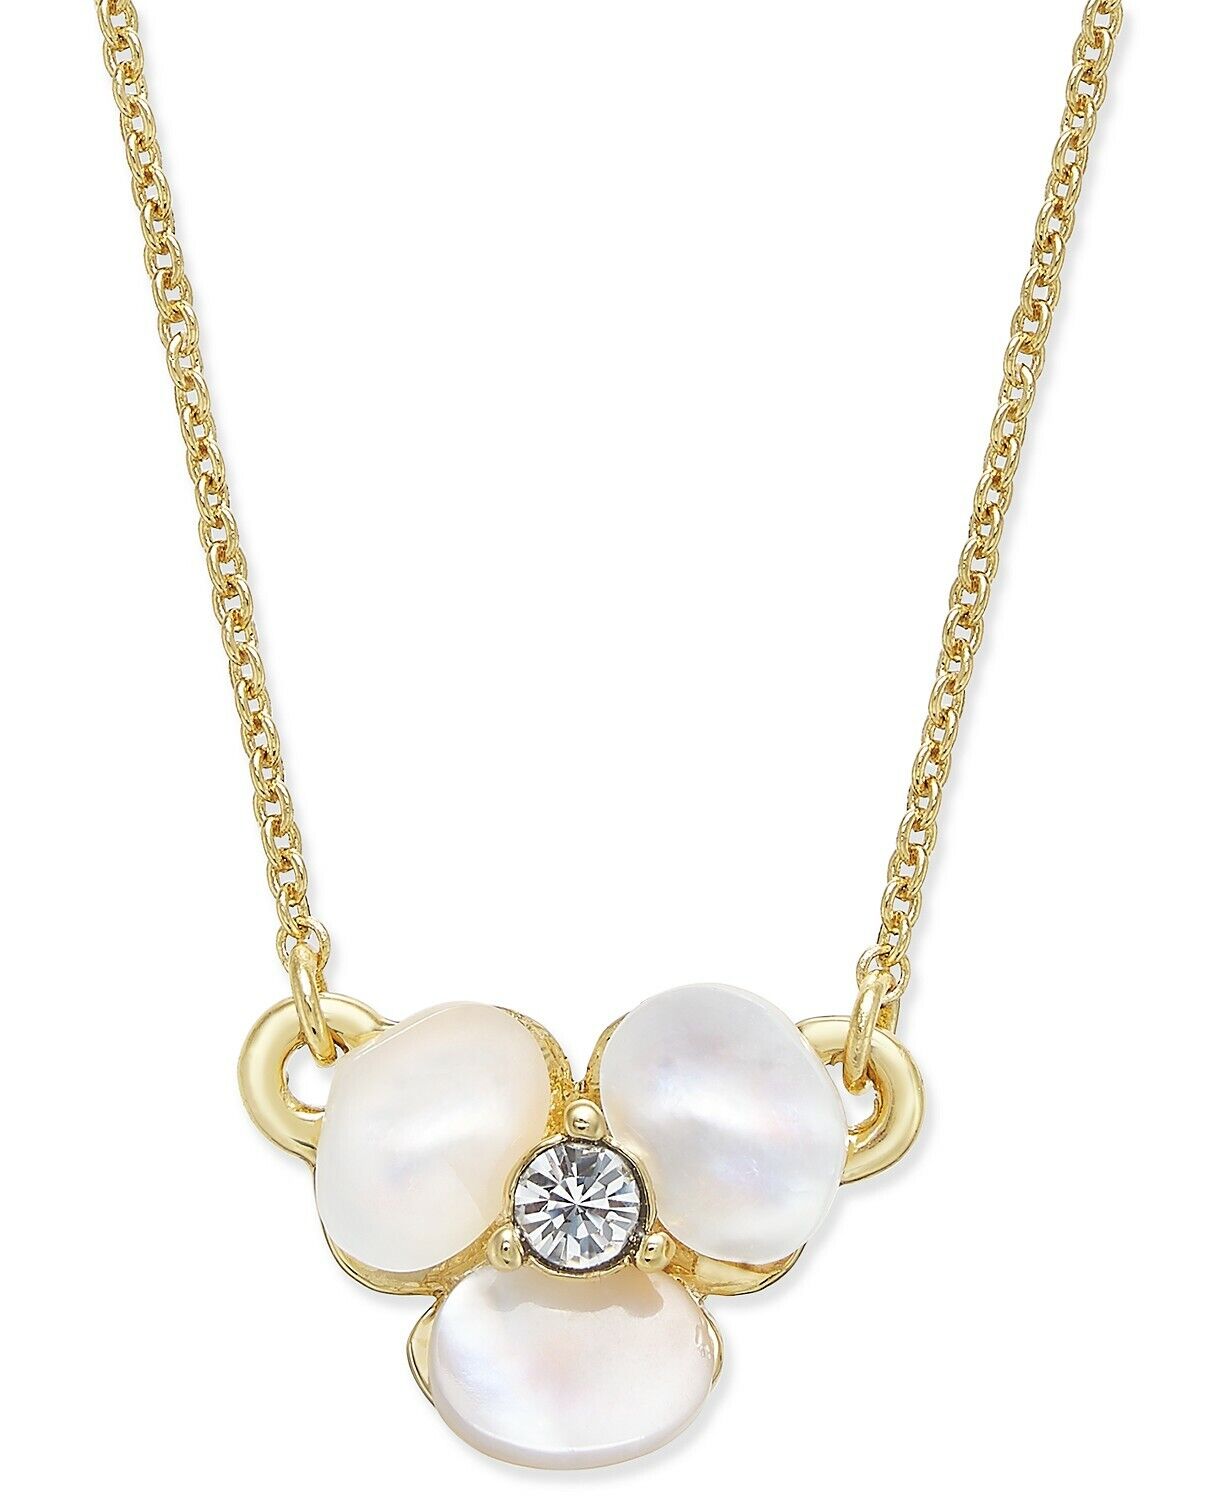 Kate Spade New York Flower Necklace